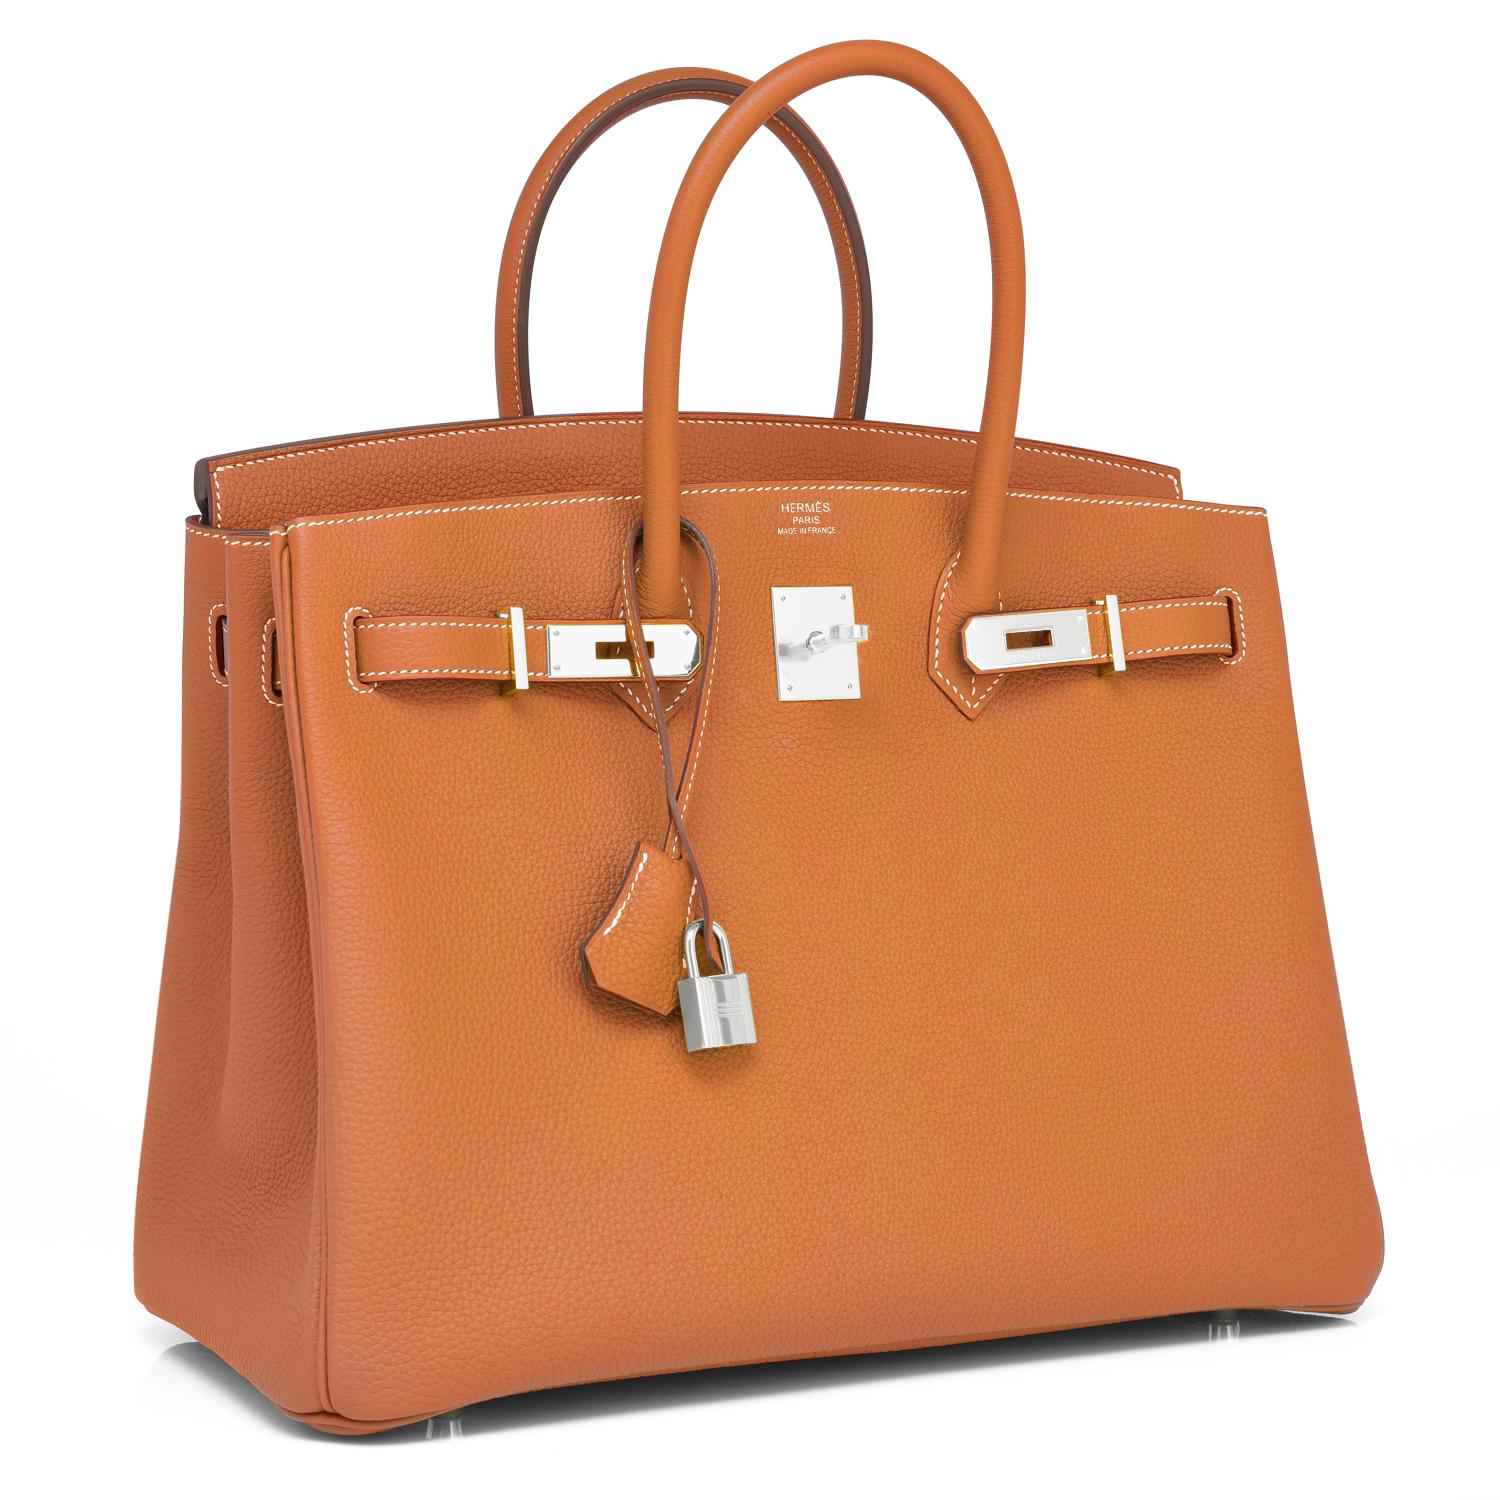 Hermes Gold Togo Camel Tan 35cm Birkin Palladium Hardware Y Stamp, 2020
Brand New in Box. Store Fresh. Pristine Condition (with plastic on hardware). 
Perfect gift! Comes with lock, keys, clochette, sleeper, raincoat, and Hermes box.
Gold is a